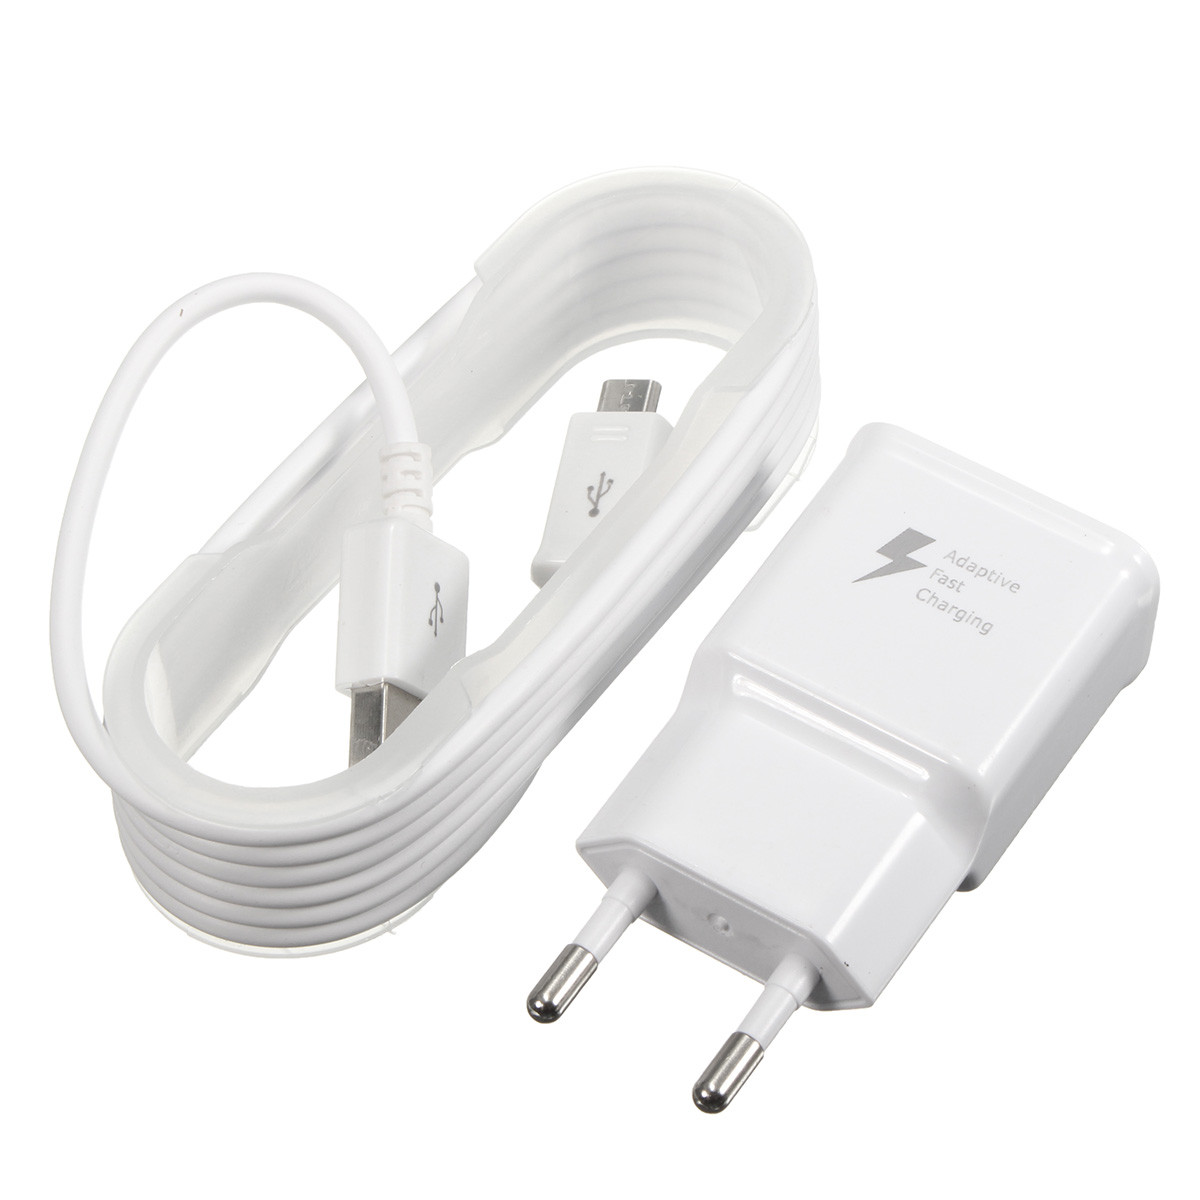 EU 9V 2A Micro USB Fast Charger Charging Cable Adapter For Android Samsung Phone